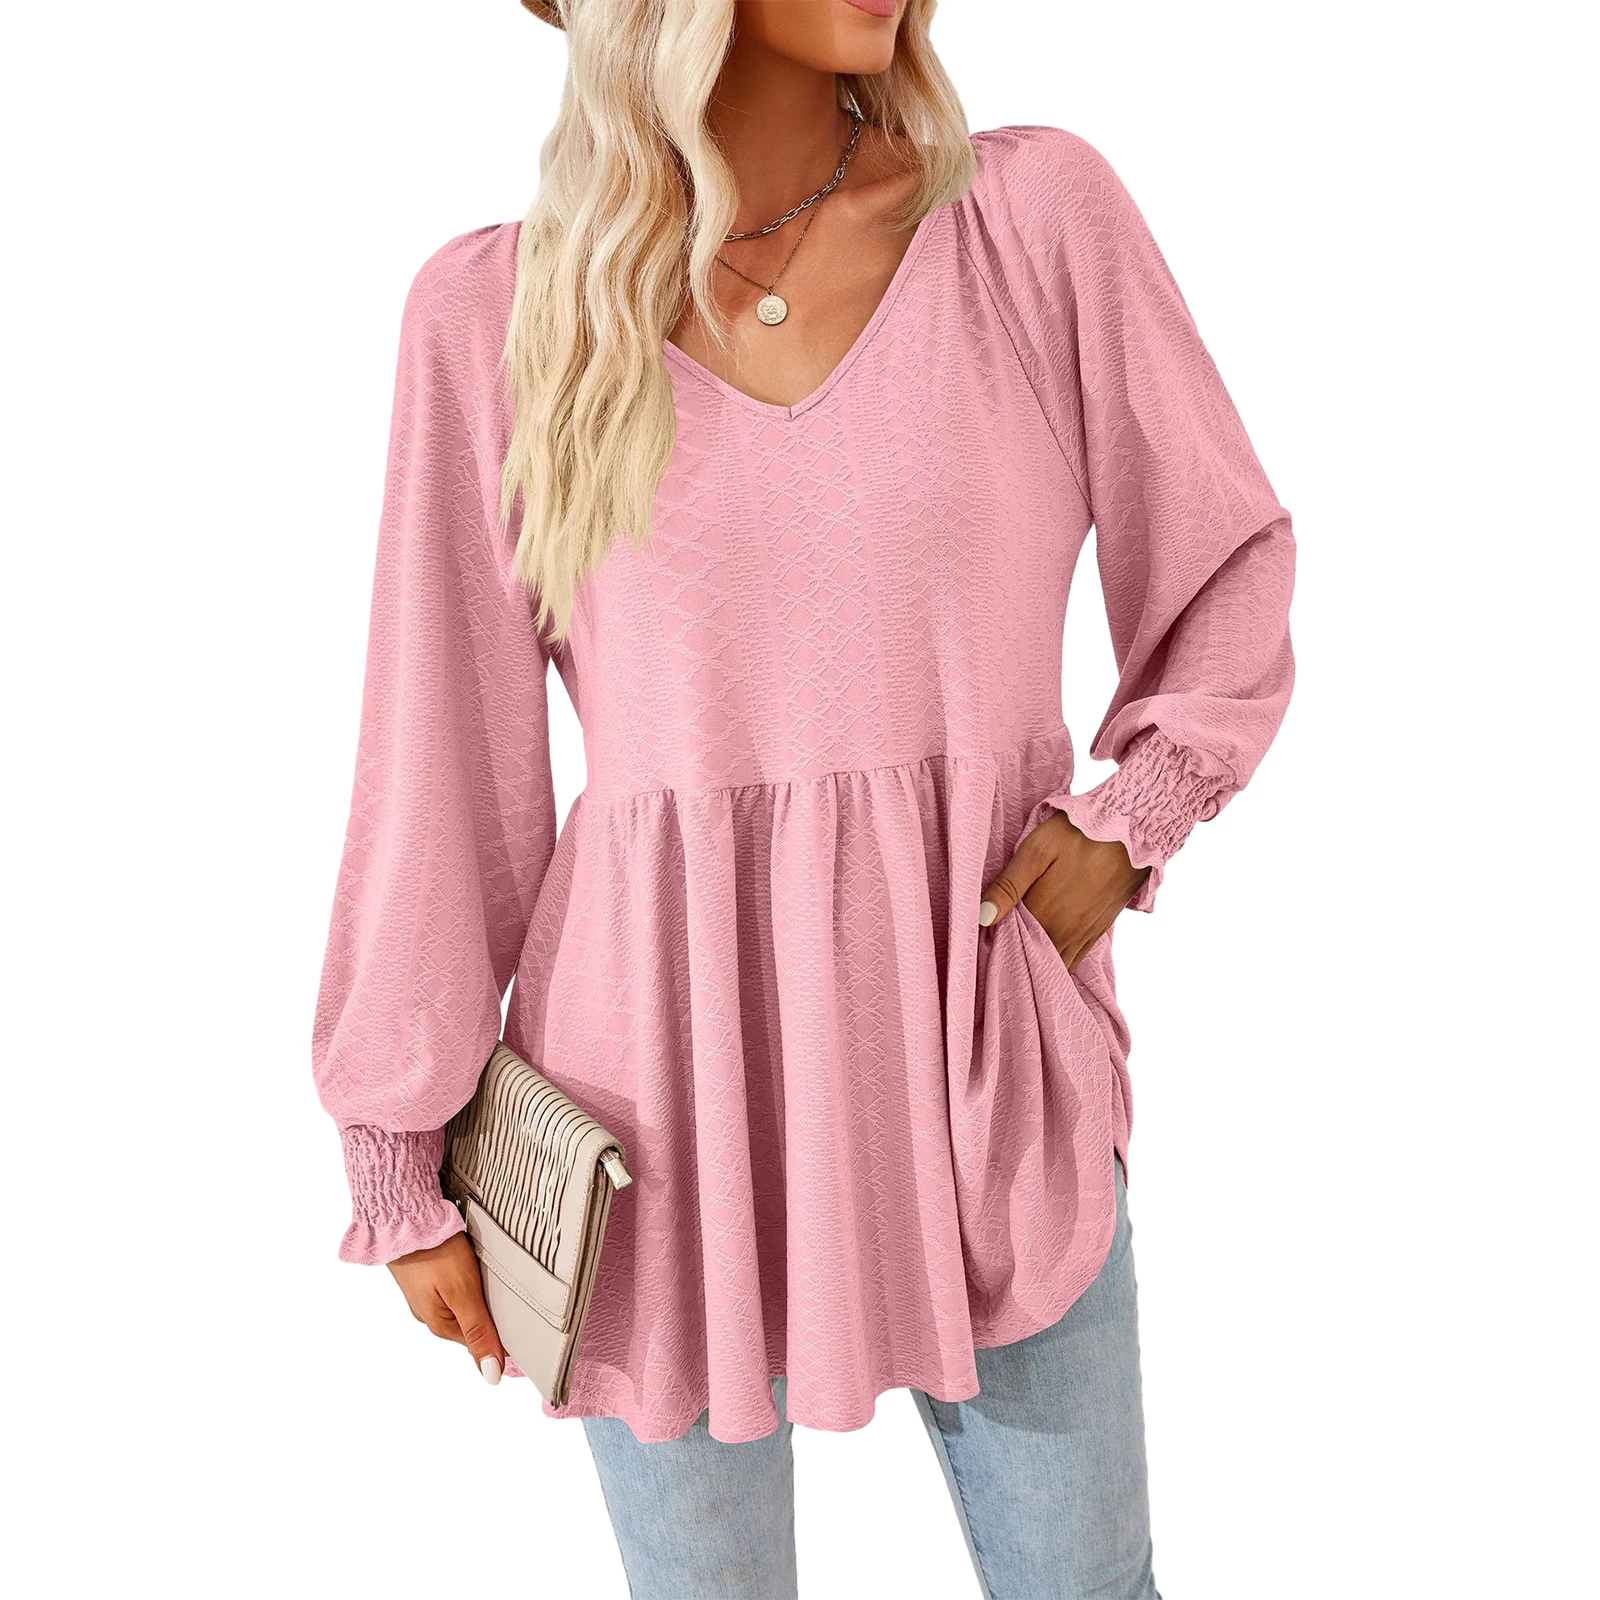 

Women's Solid Color Casual Tunic Tops Long Sleeve V Neck Jacquard Loose T-Shirts Peplum Blouses Female Fall Clothes